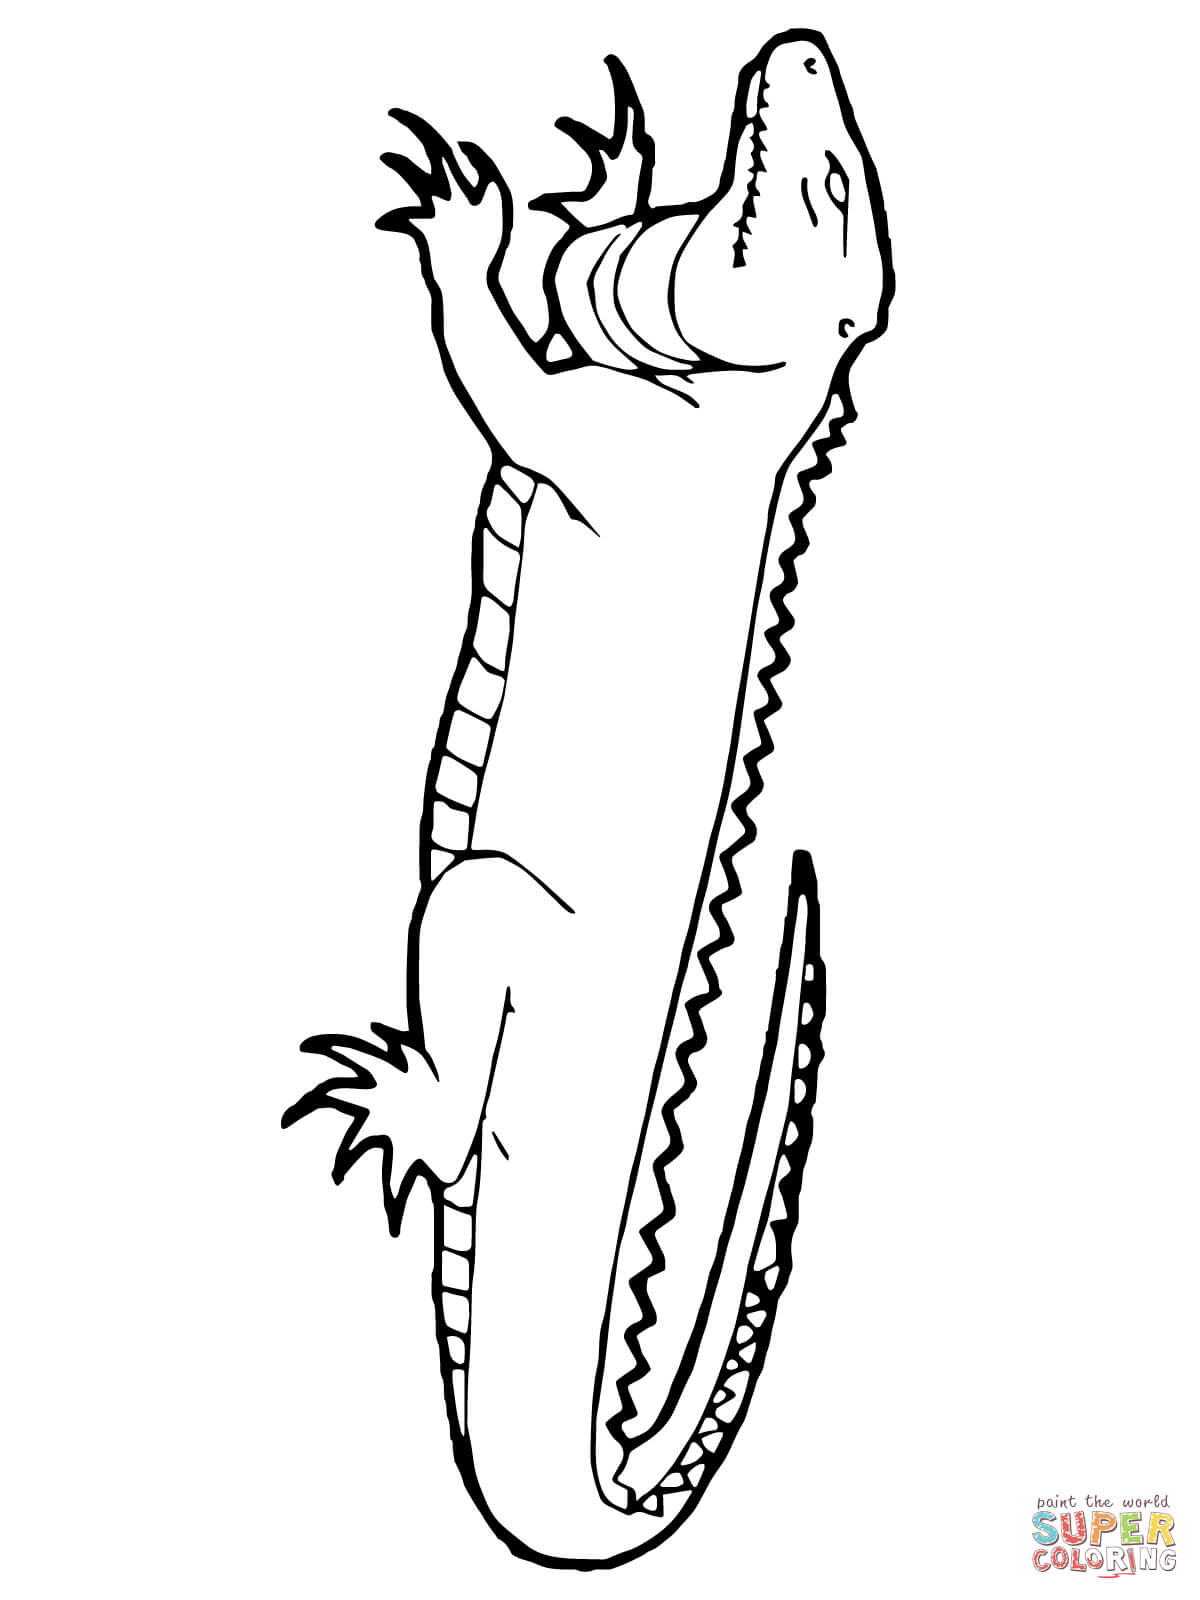 Basilisk Lizard Coloring Page Free Printable Coloring Pages